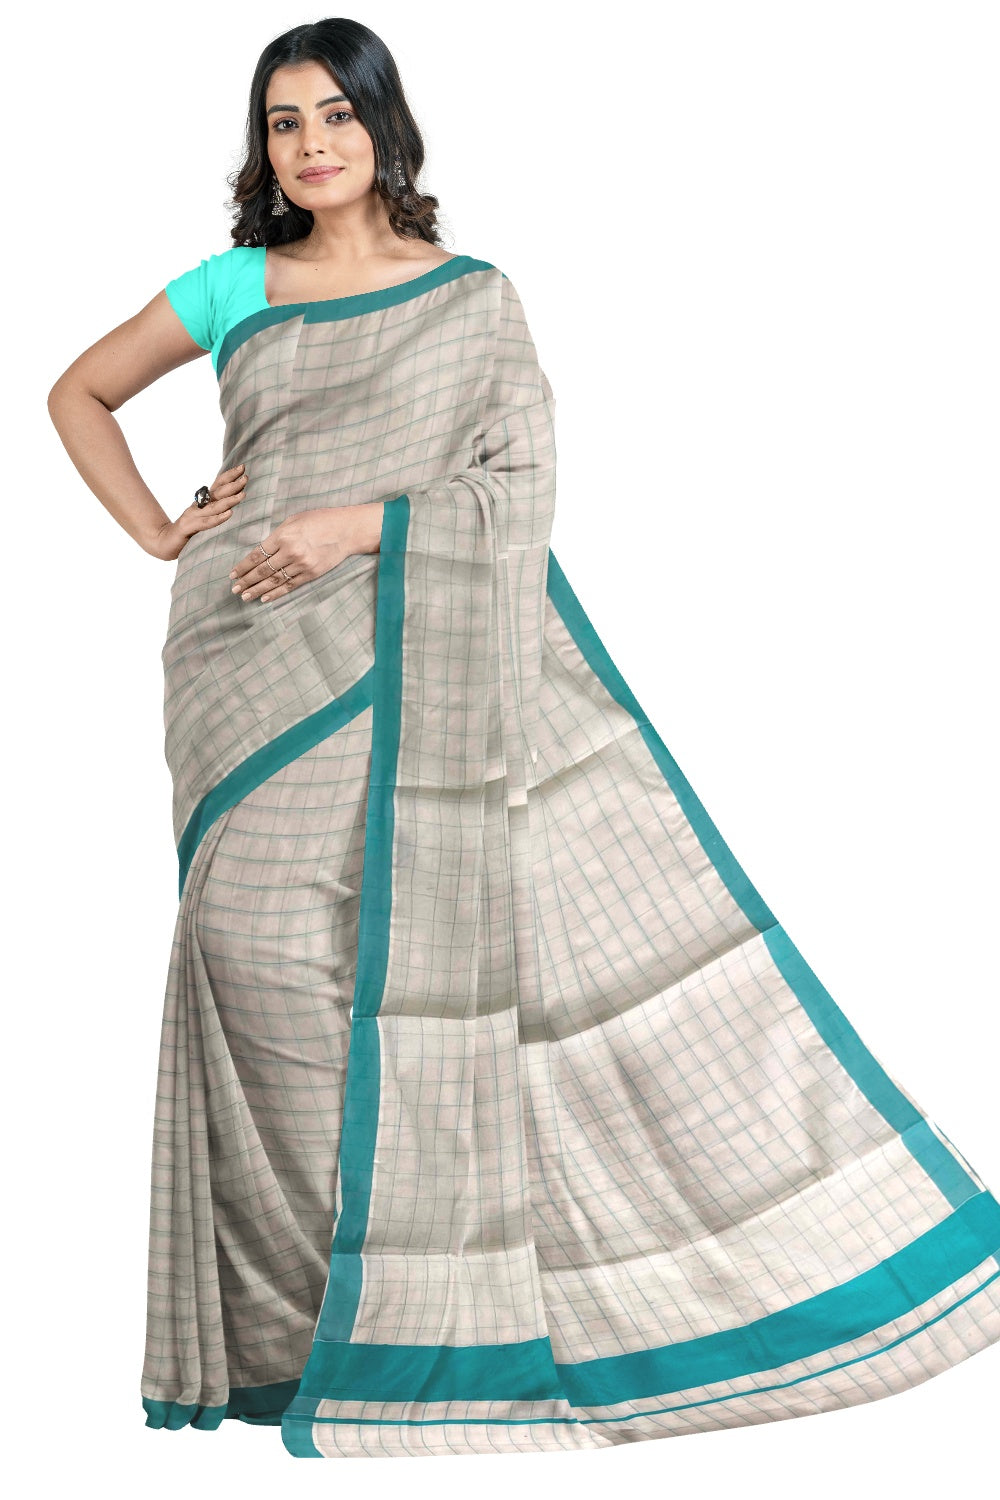 Kerala Pure Cotton Turquoise Woven Check Saree with 3 inch Border